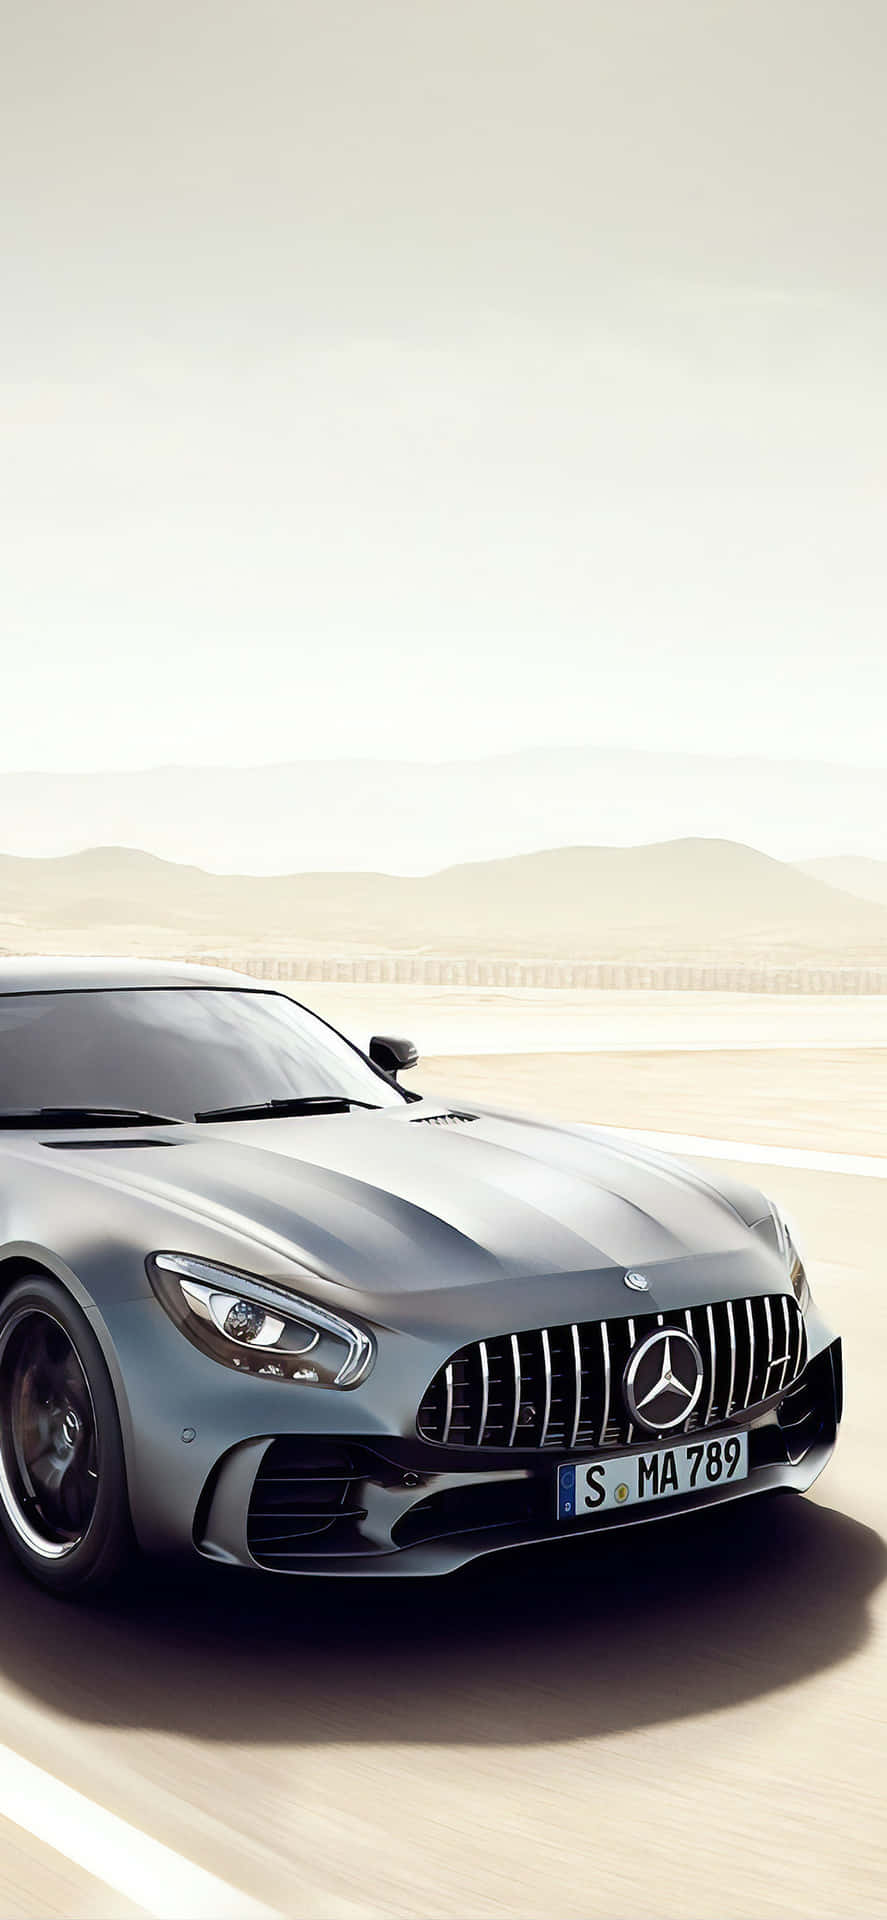 Iphone Xs Mercedes Amg Background Wallpaper